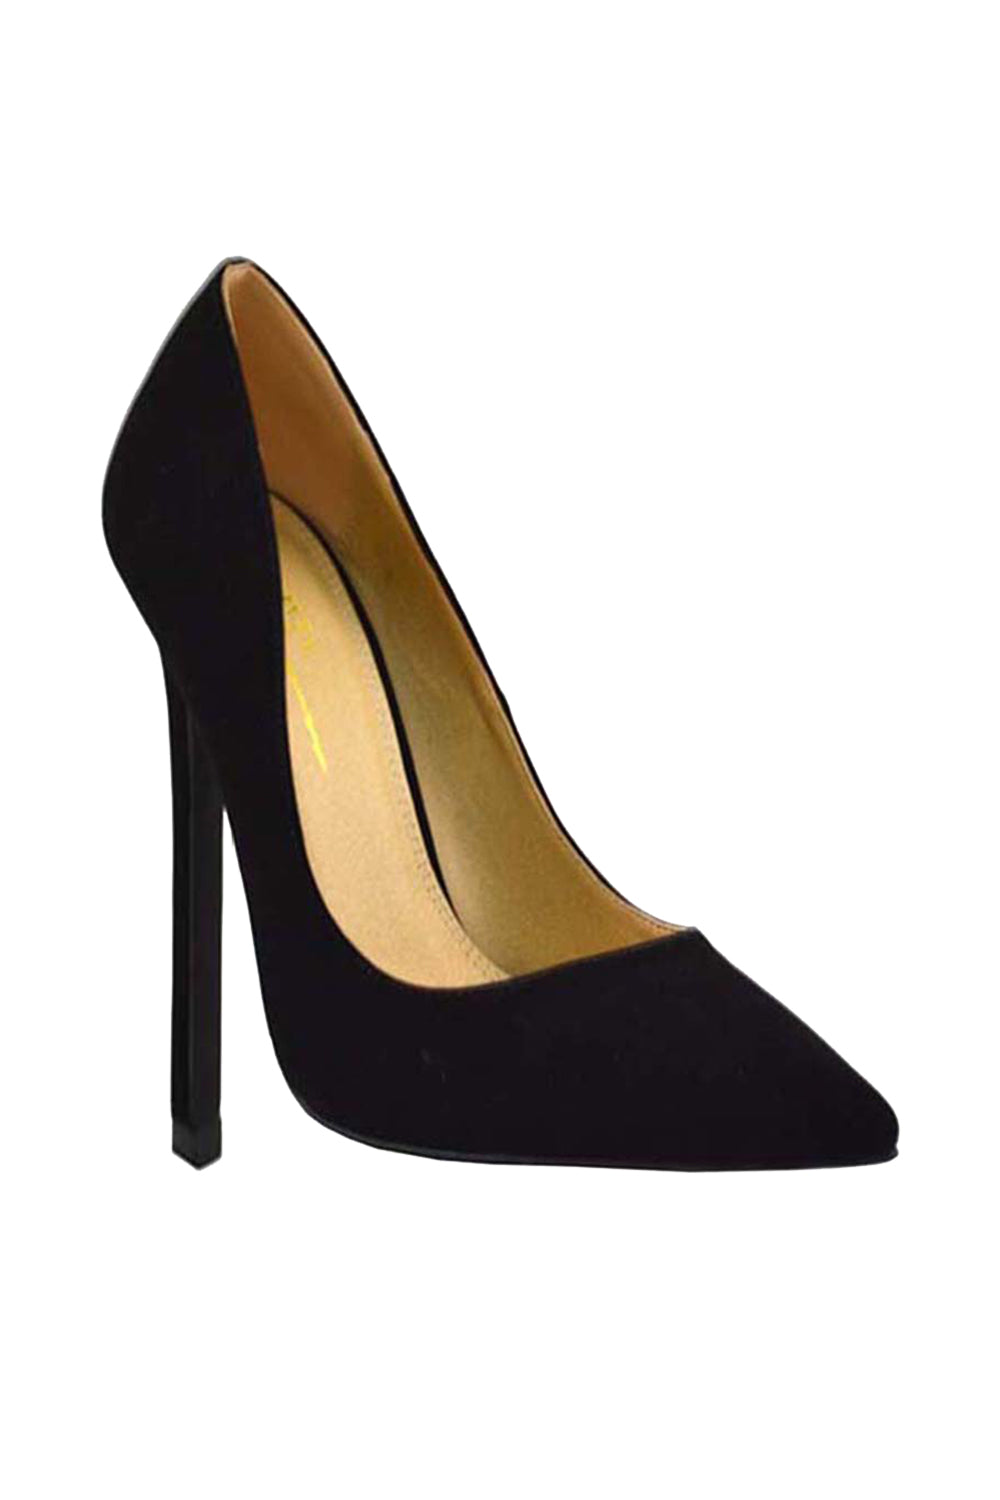 Black Suede Heeled Pumps With Pointed Toe | Whistles |